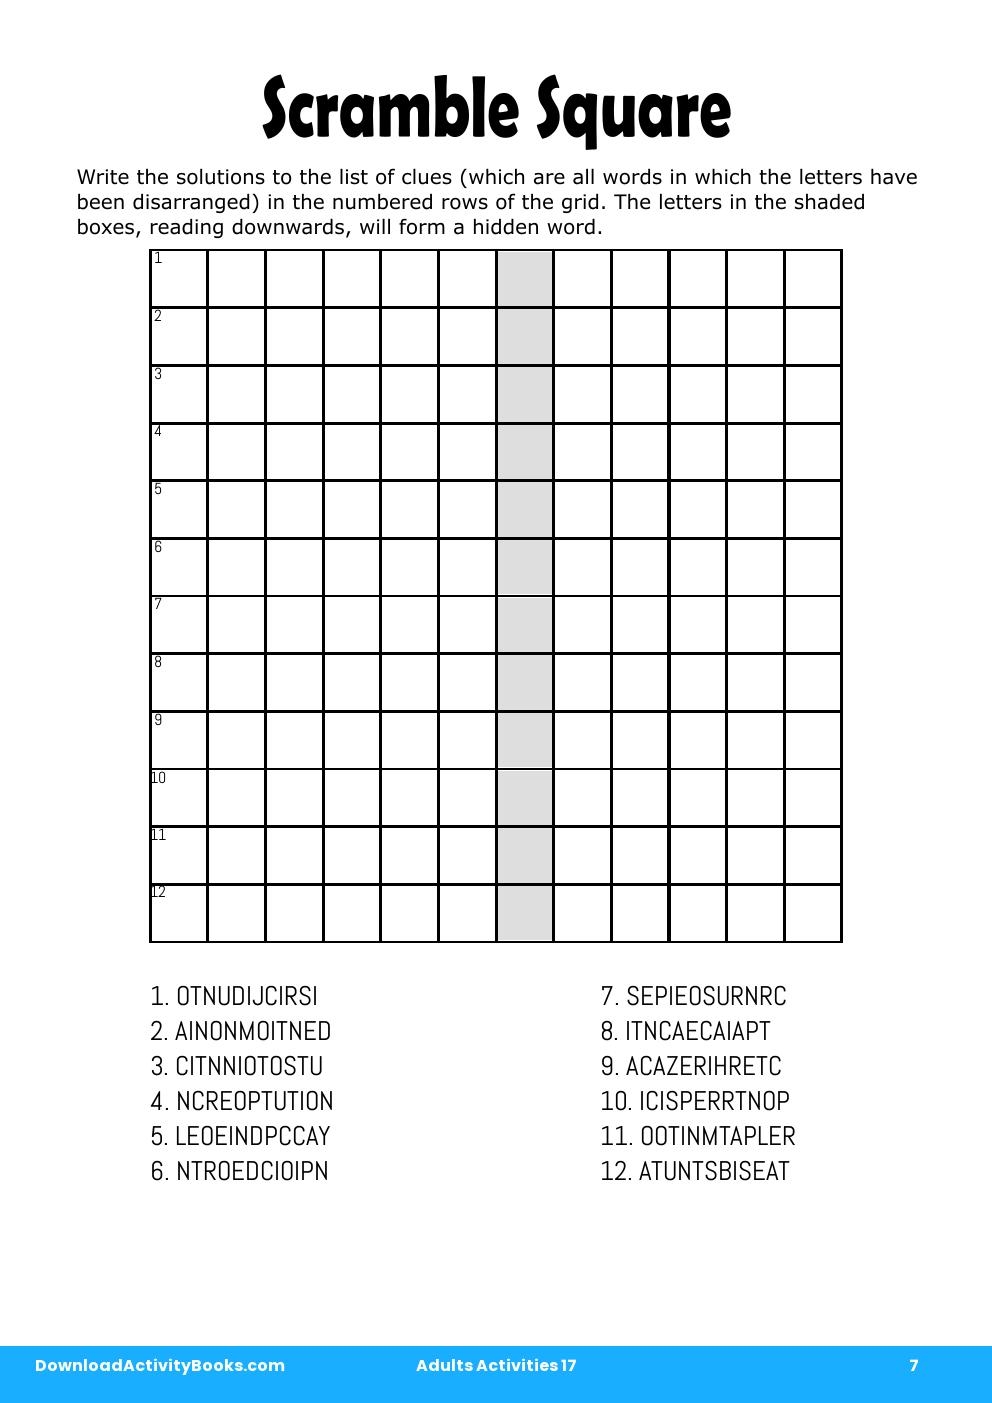 Scramble Square in Adults Activities 17